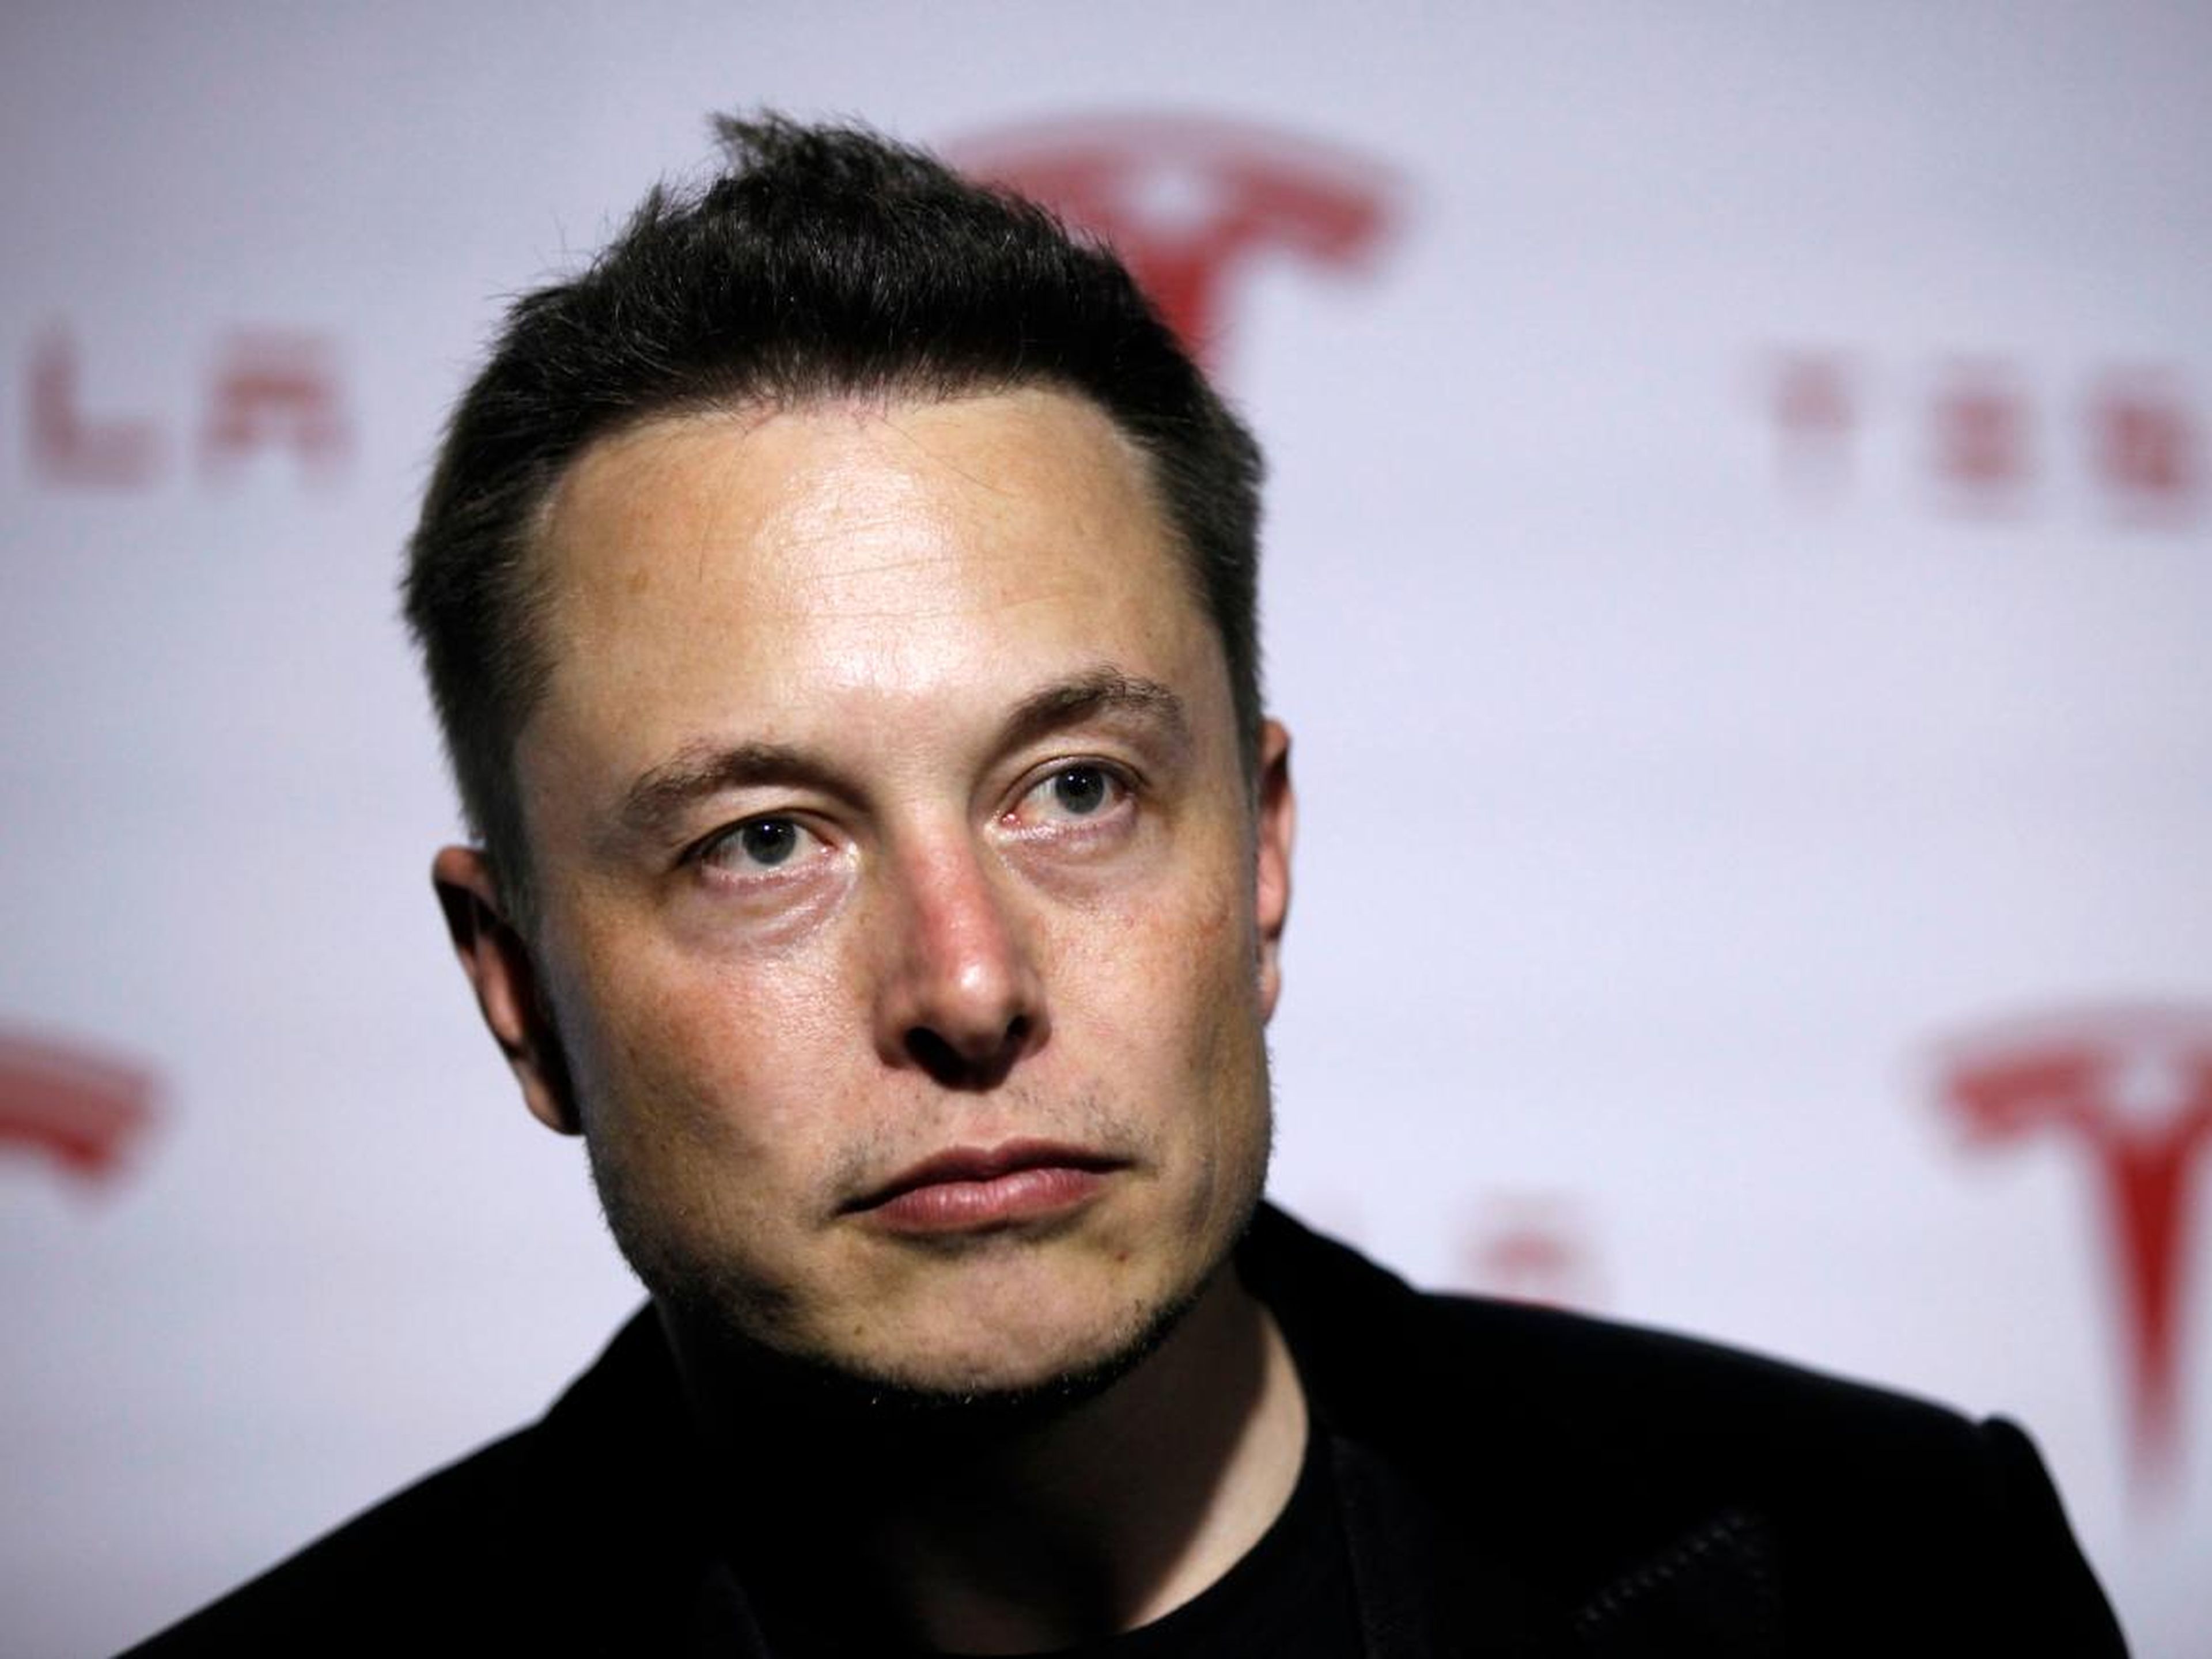 September: Tesla CEO Elon Musk has to pay $20 million to settle a lawsuit with the SEC after tweeting he planned to take his company private.